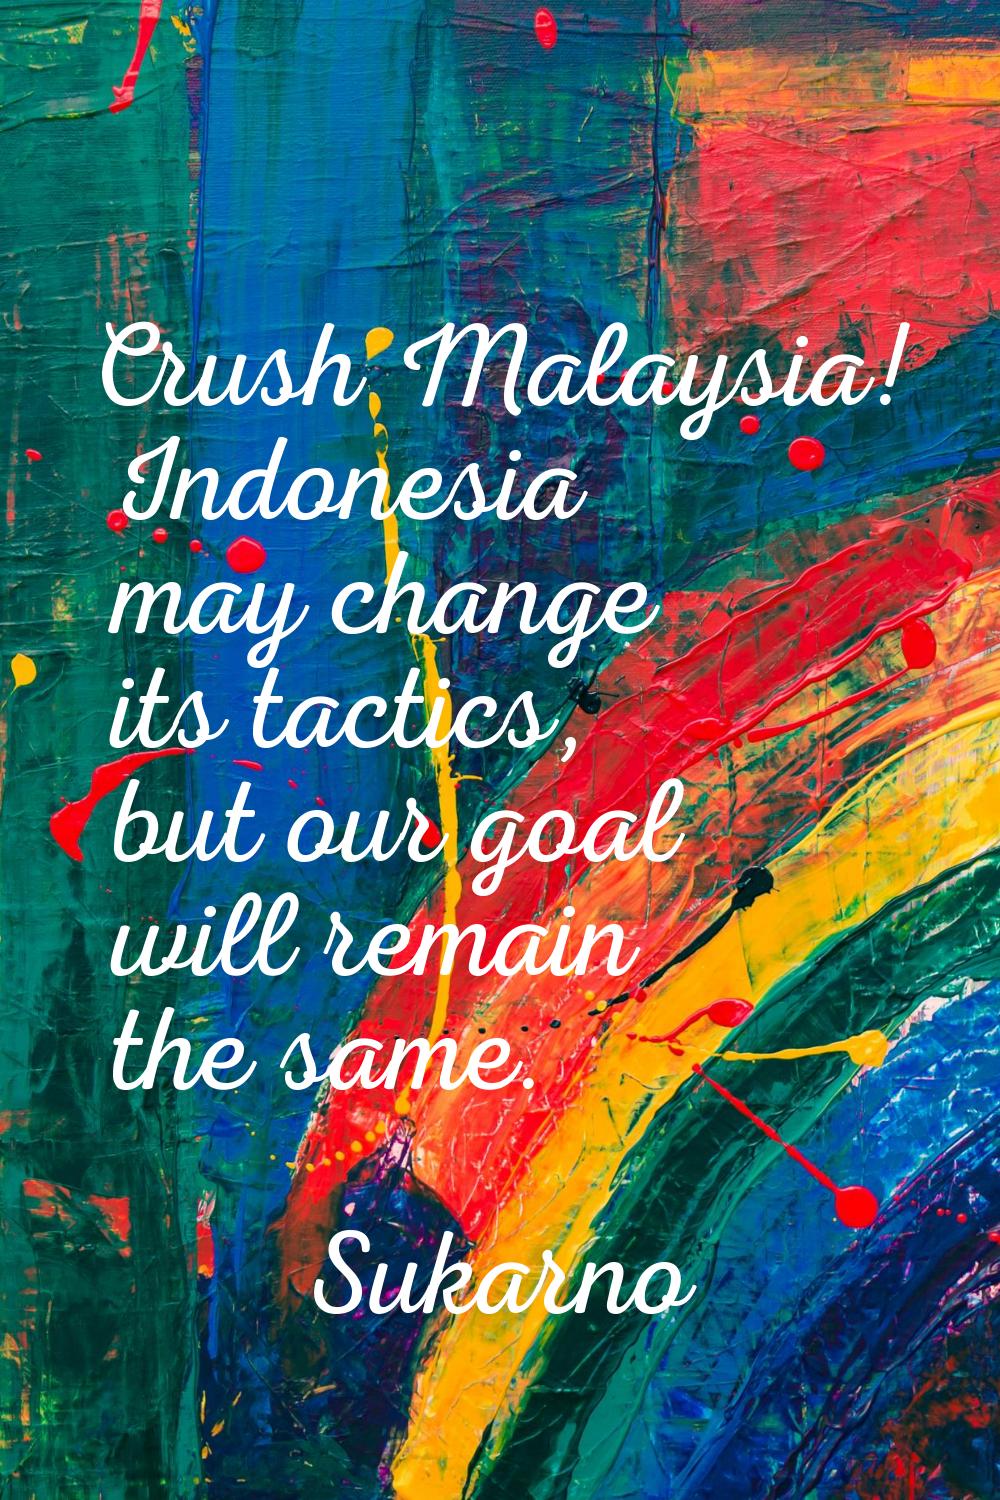 Crush Malaysia! Indonesia may change its tactics, but our goal will remain the same.